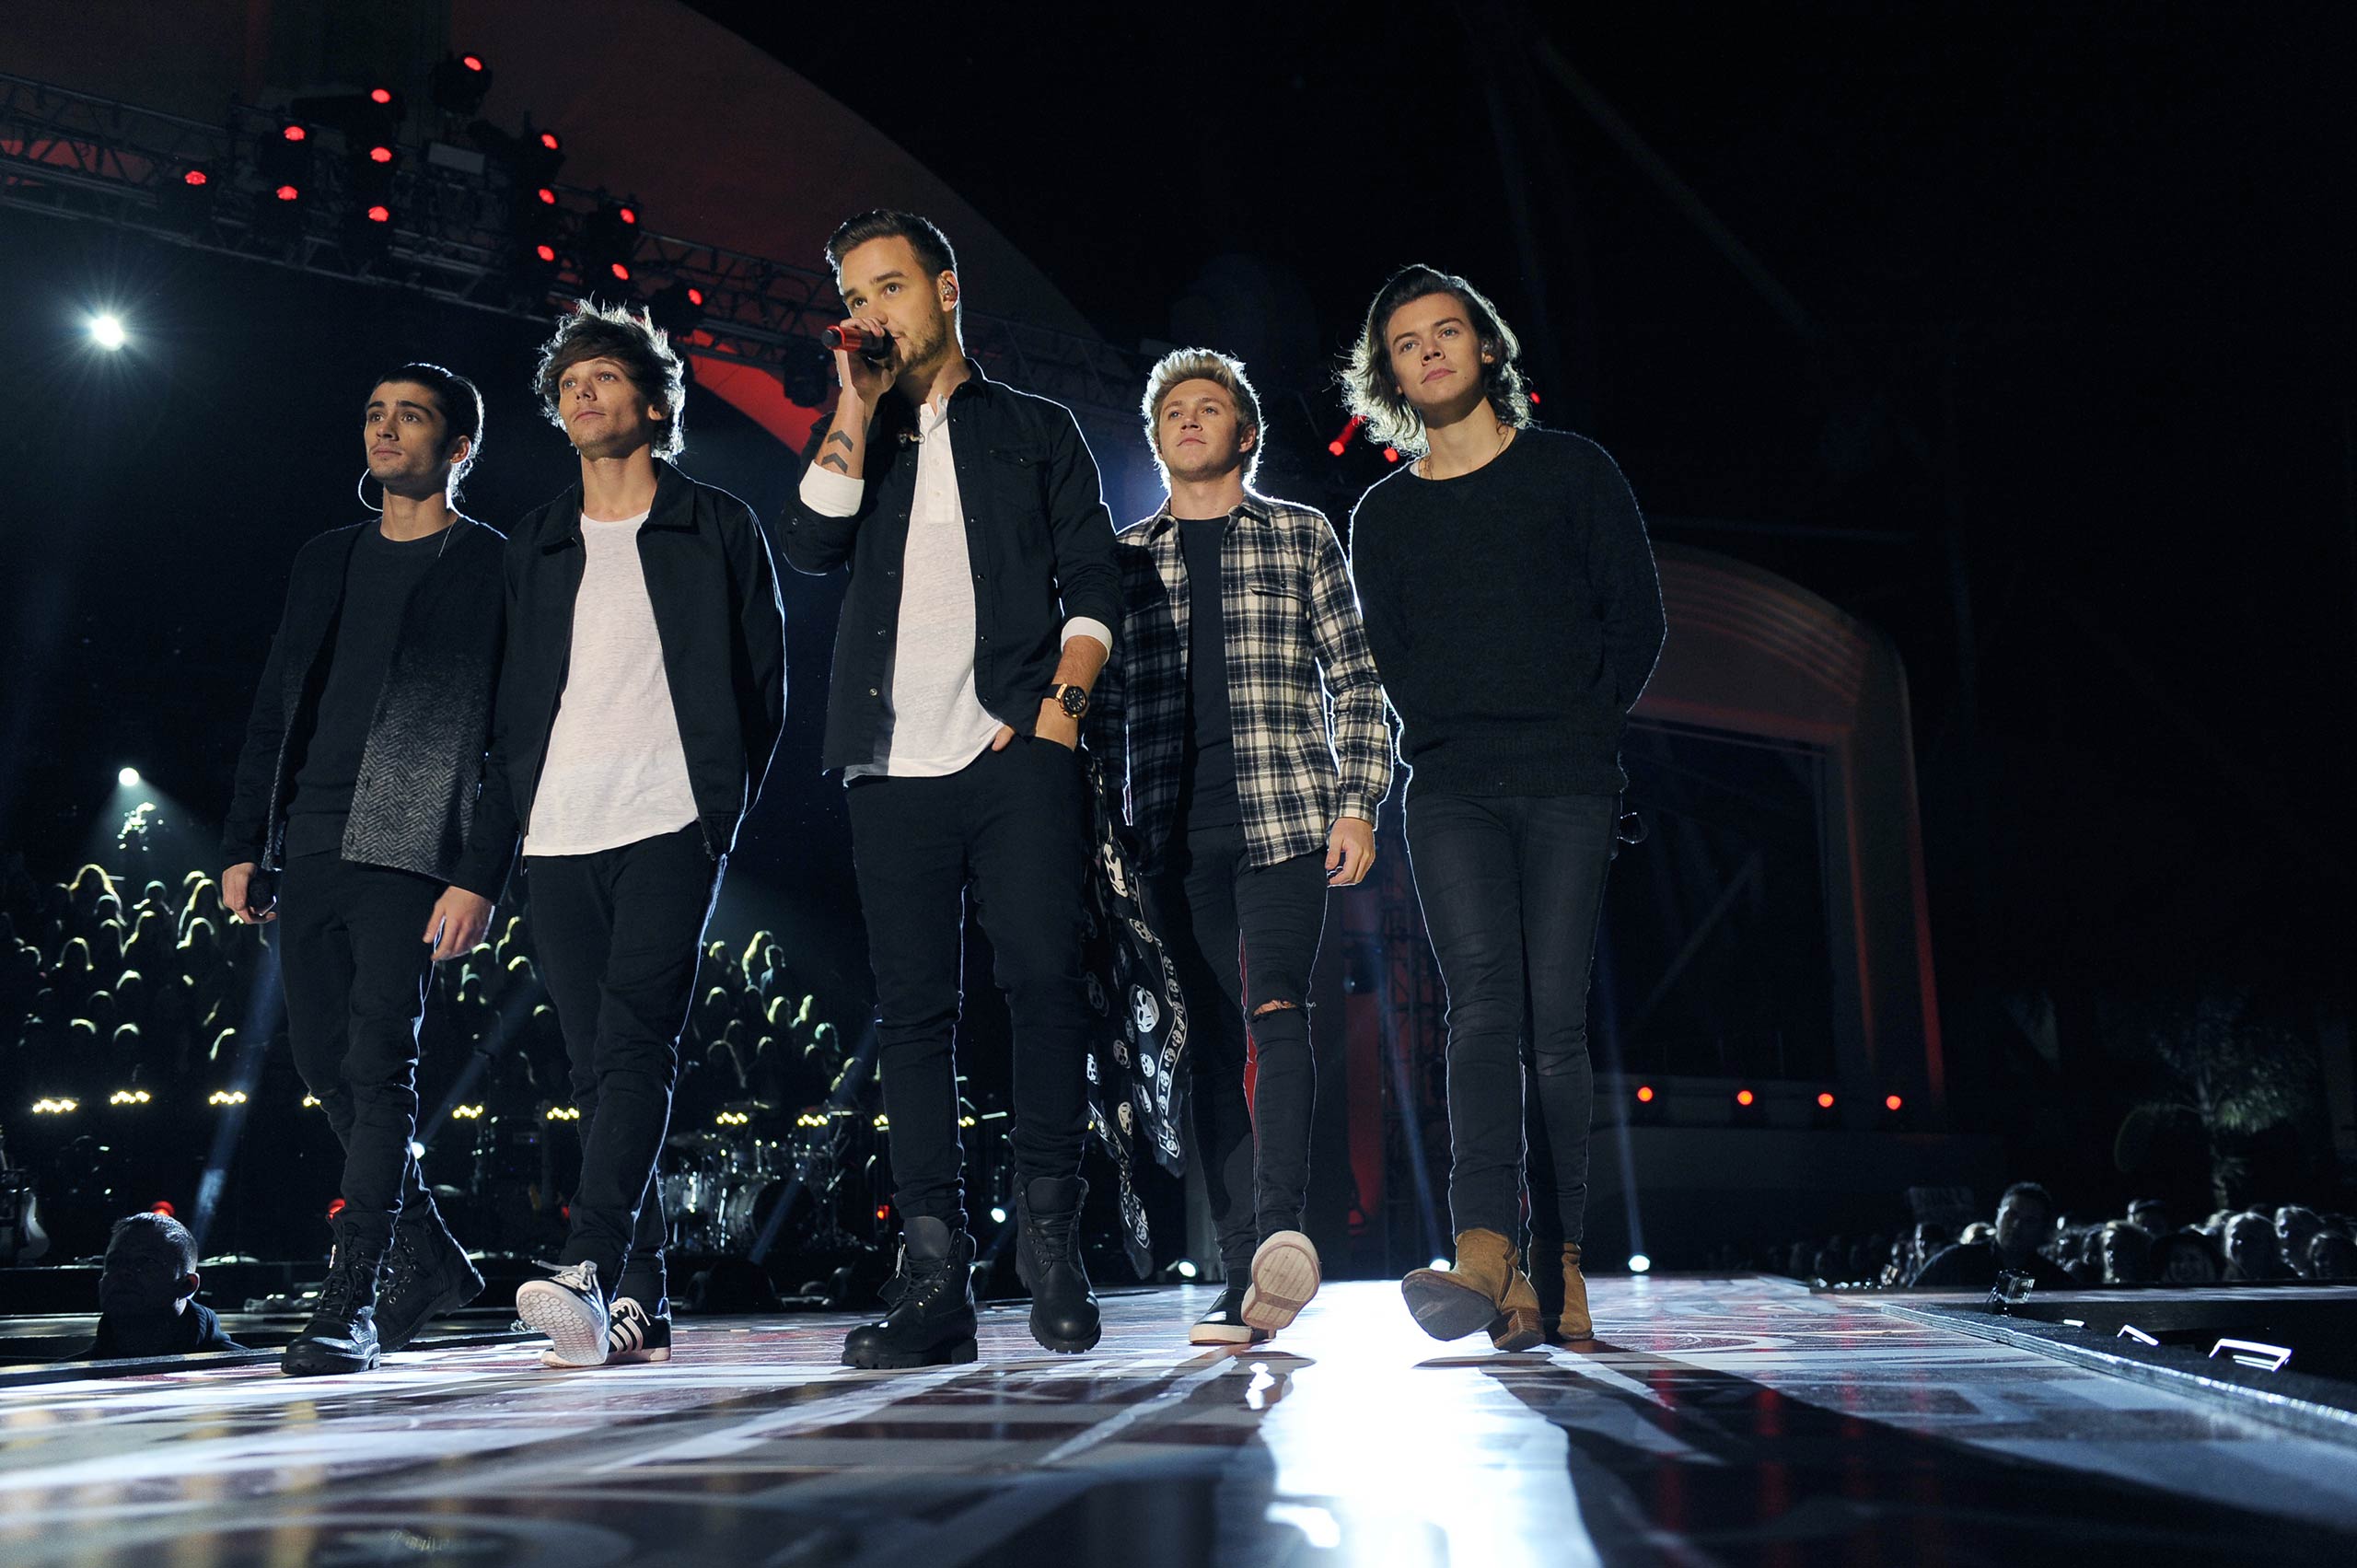 Zayn Malik, Louis Tomlinson, Liam Payne, Niall Horan and Harry Styles on the One Direction TV special in 2014.